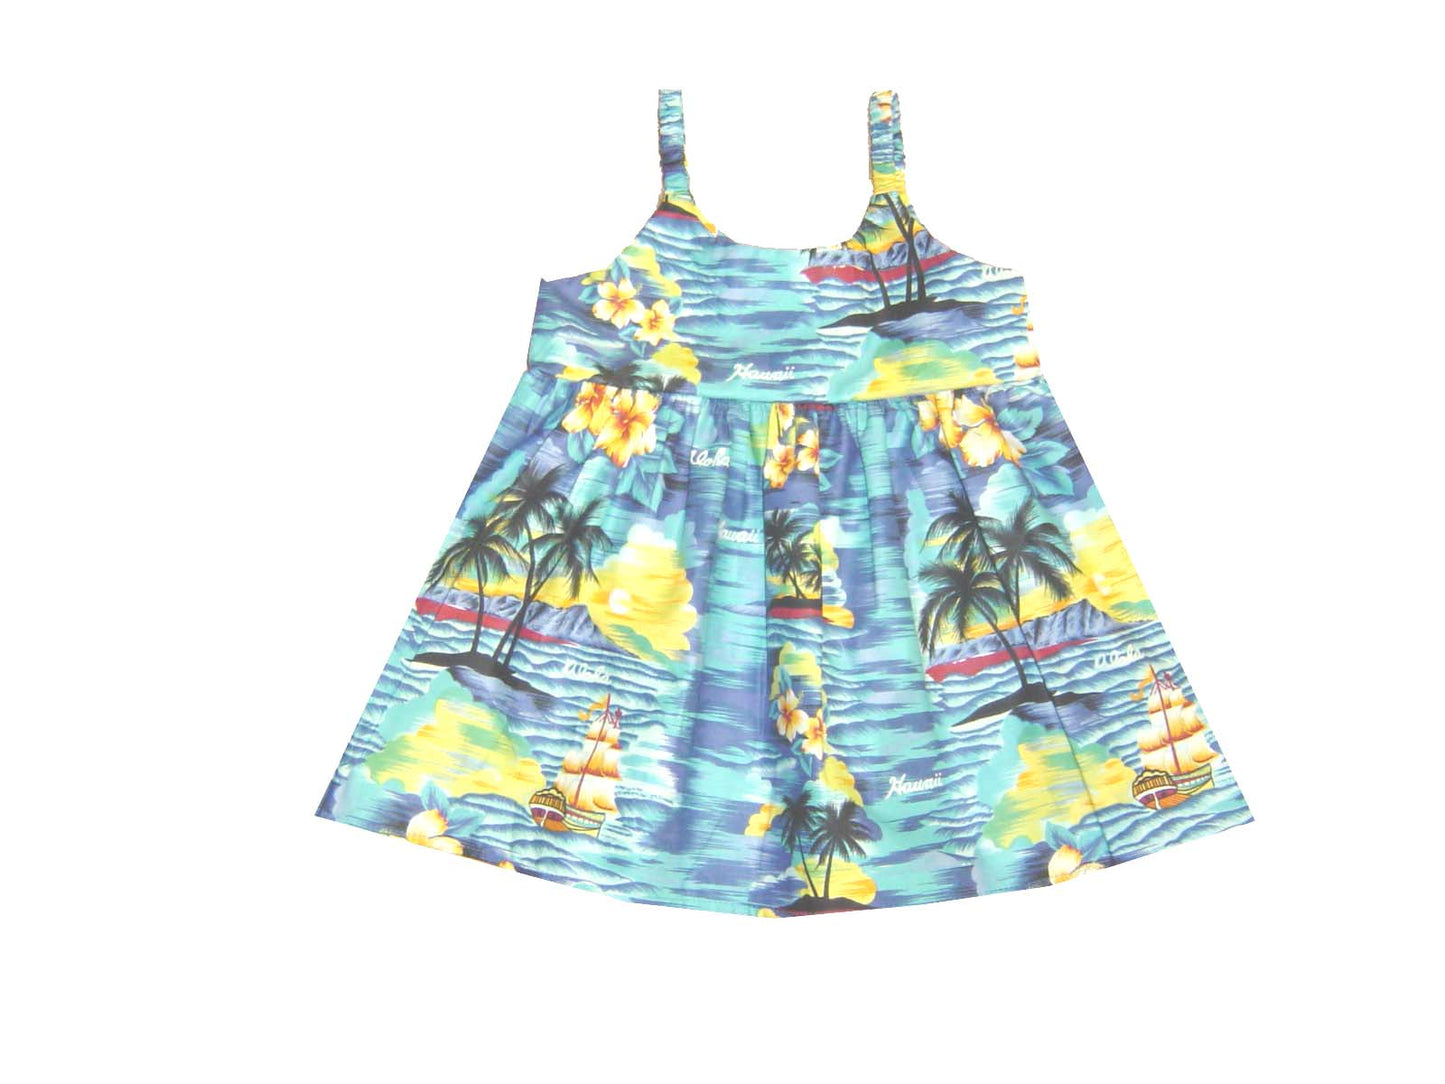 Matching Boy's Sets and Girl Dress Sunset in Ocean with Aloha and Hawaii Printed on.